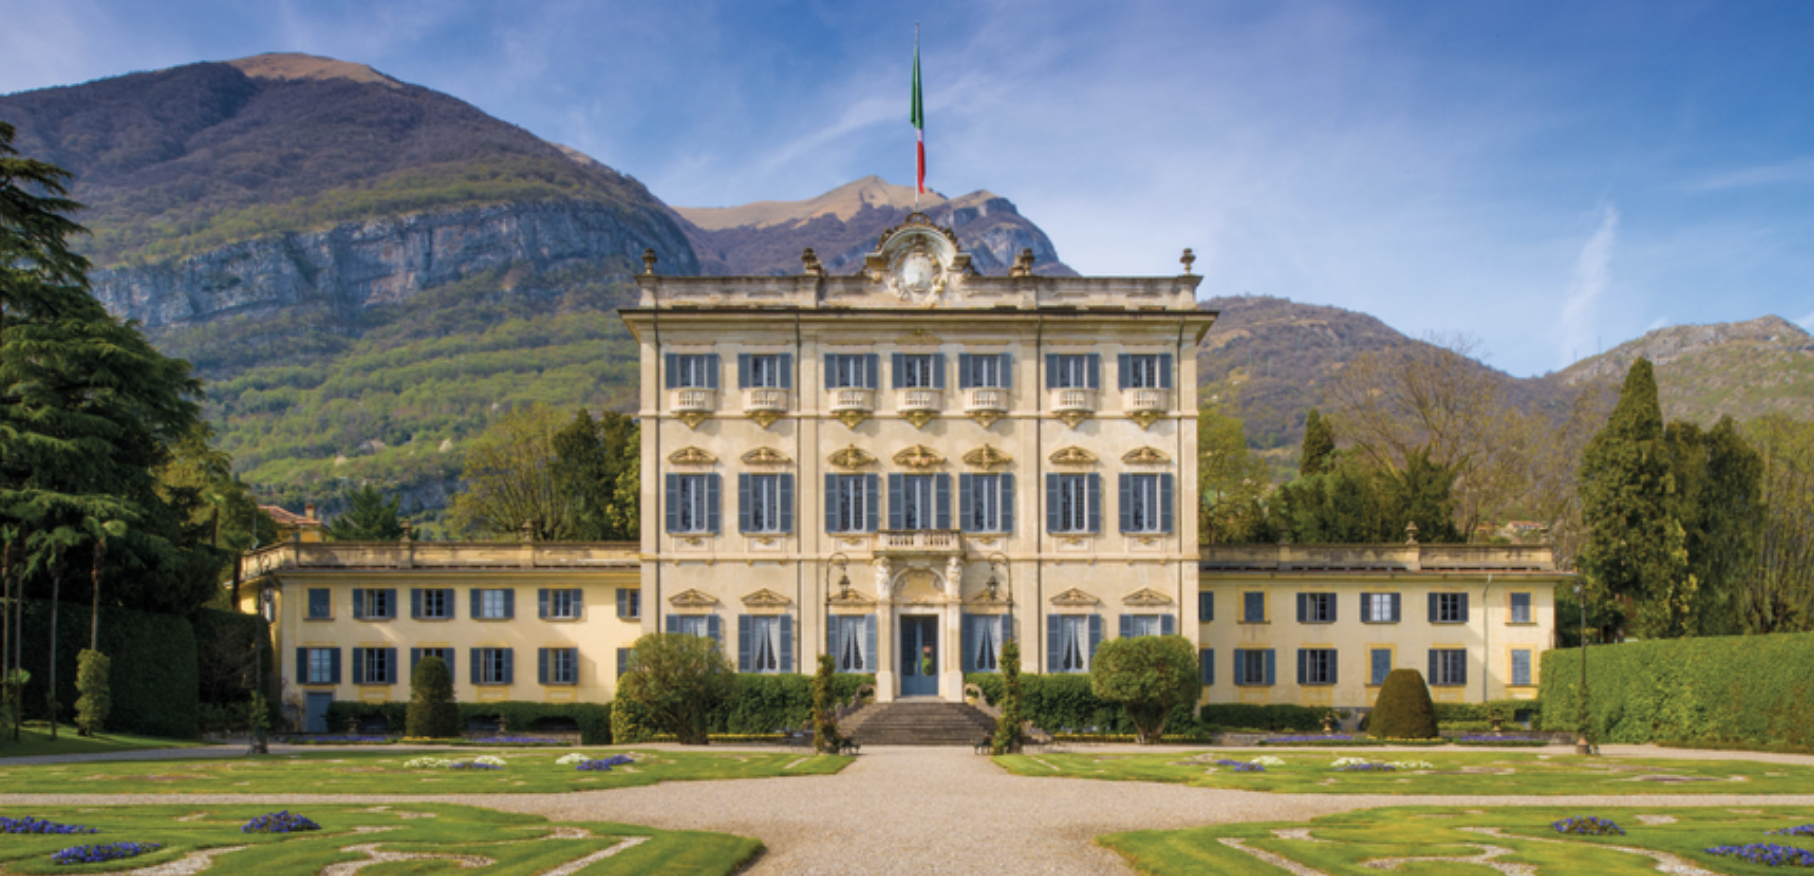 Villa-Sola-Cabiati-Grand-Hotel-Tremezzo-Luxury-Wedding-Planner-Lucy-Till-French-Weddings-Lake-Como-Italy-France-Provence-French-Riviera-Alps.png